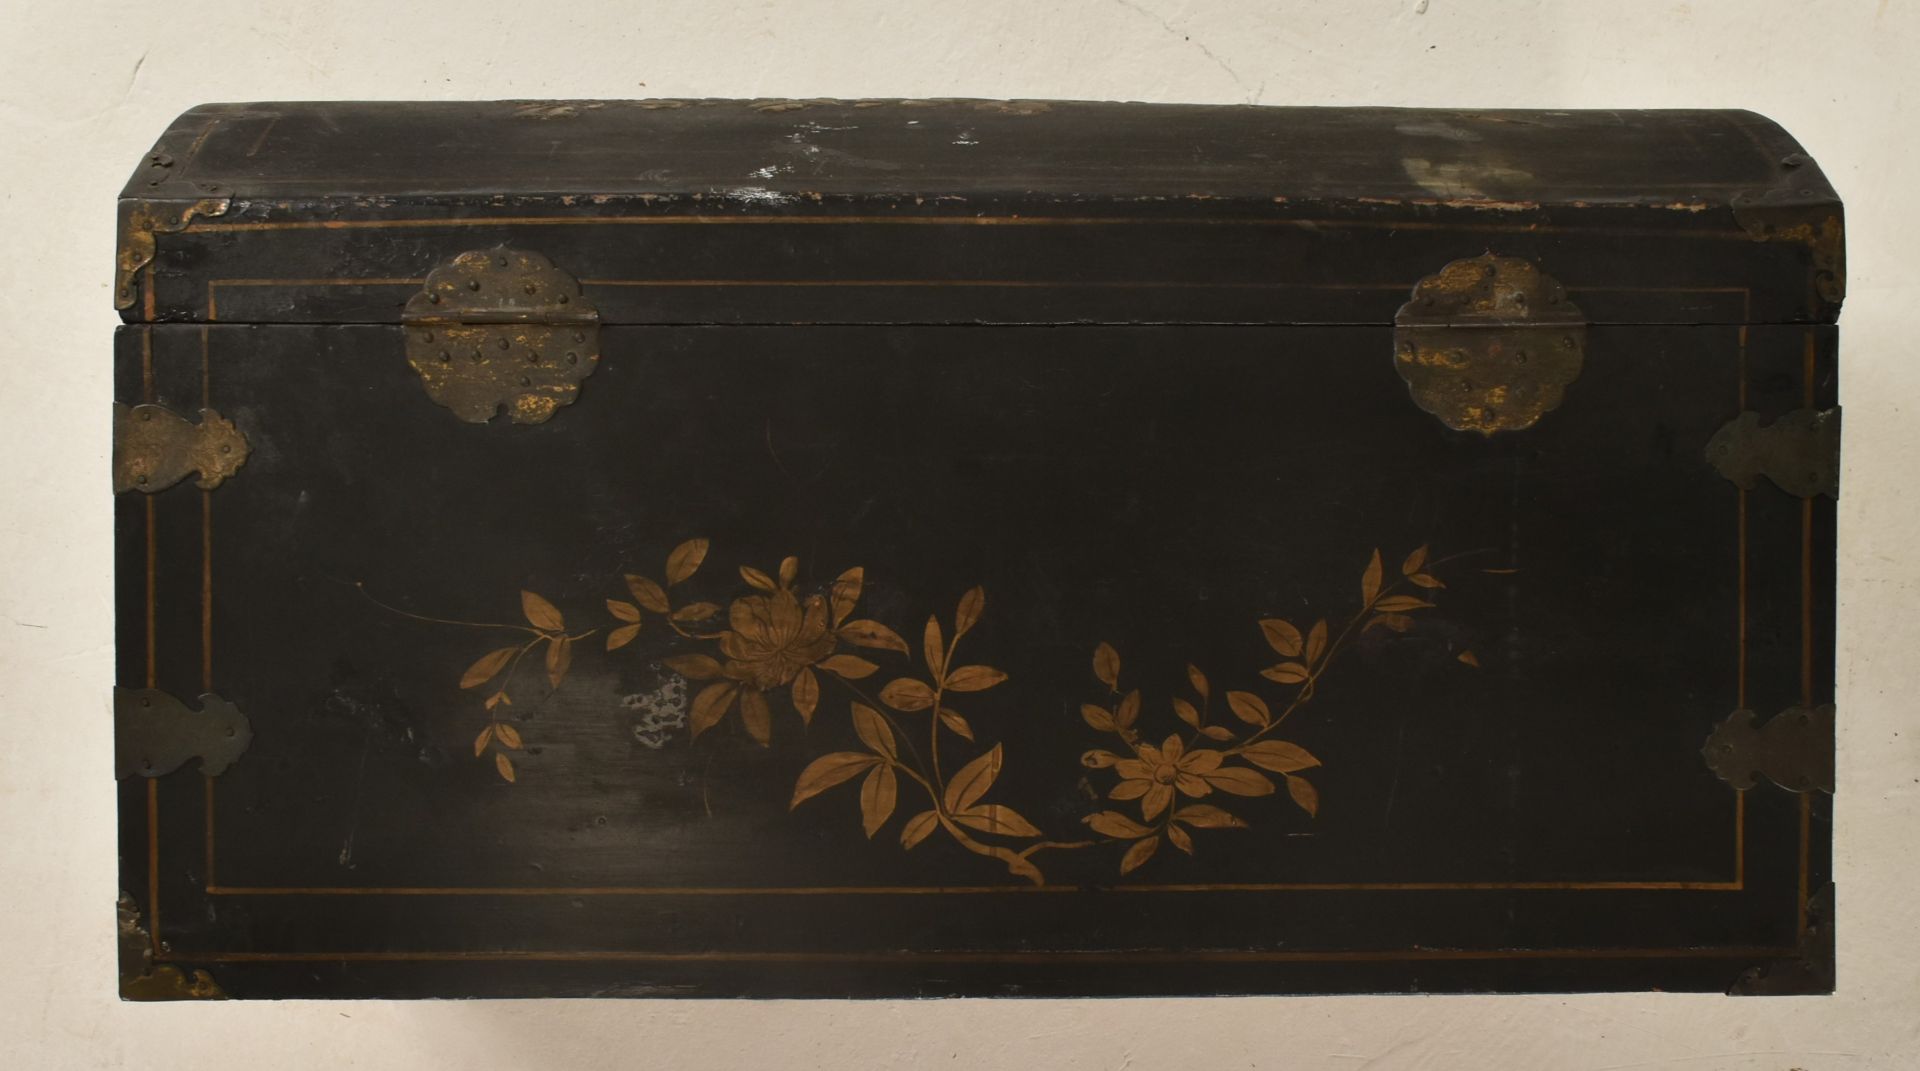 QING DYNASTY WOODEN LACQUERED STORAGE CHEST 清 富贵木宝箱 - Image 7 of 10